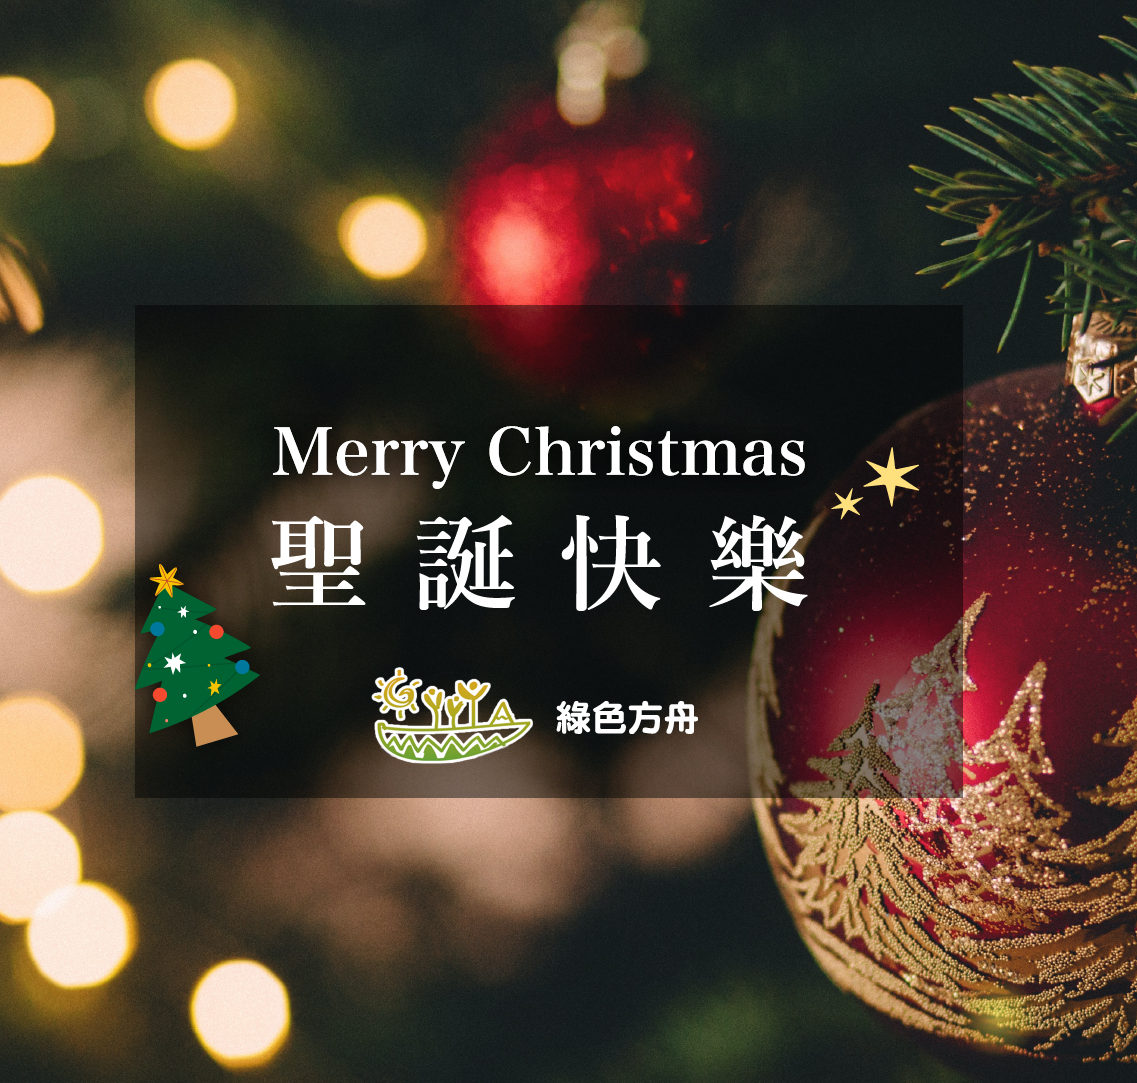 You are currently viewing Merry Christmas 聖誕快樂🎄